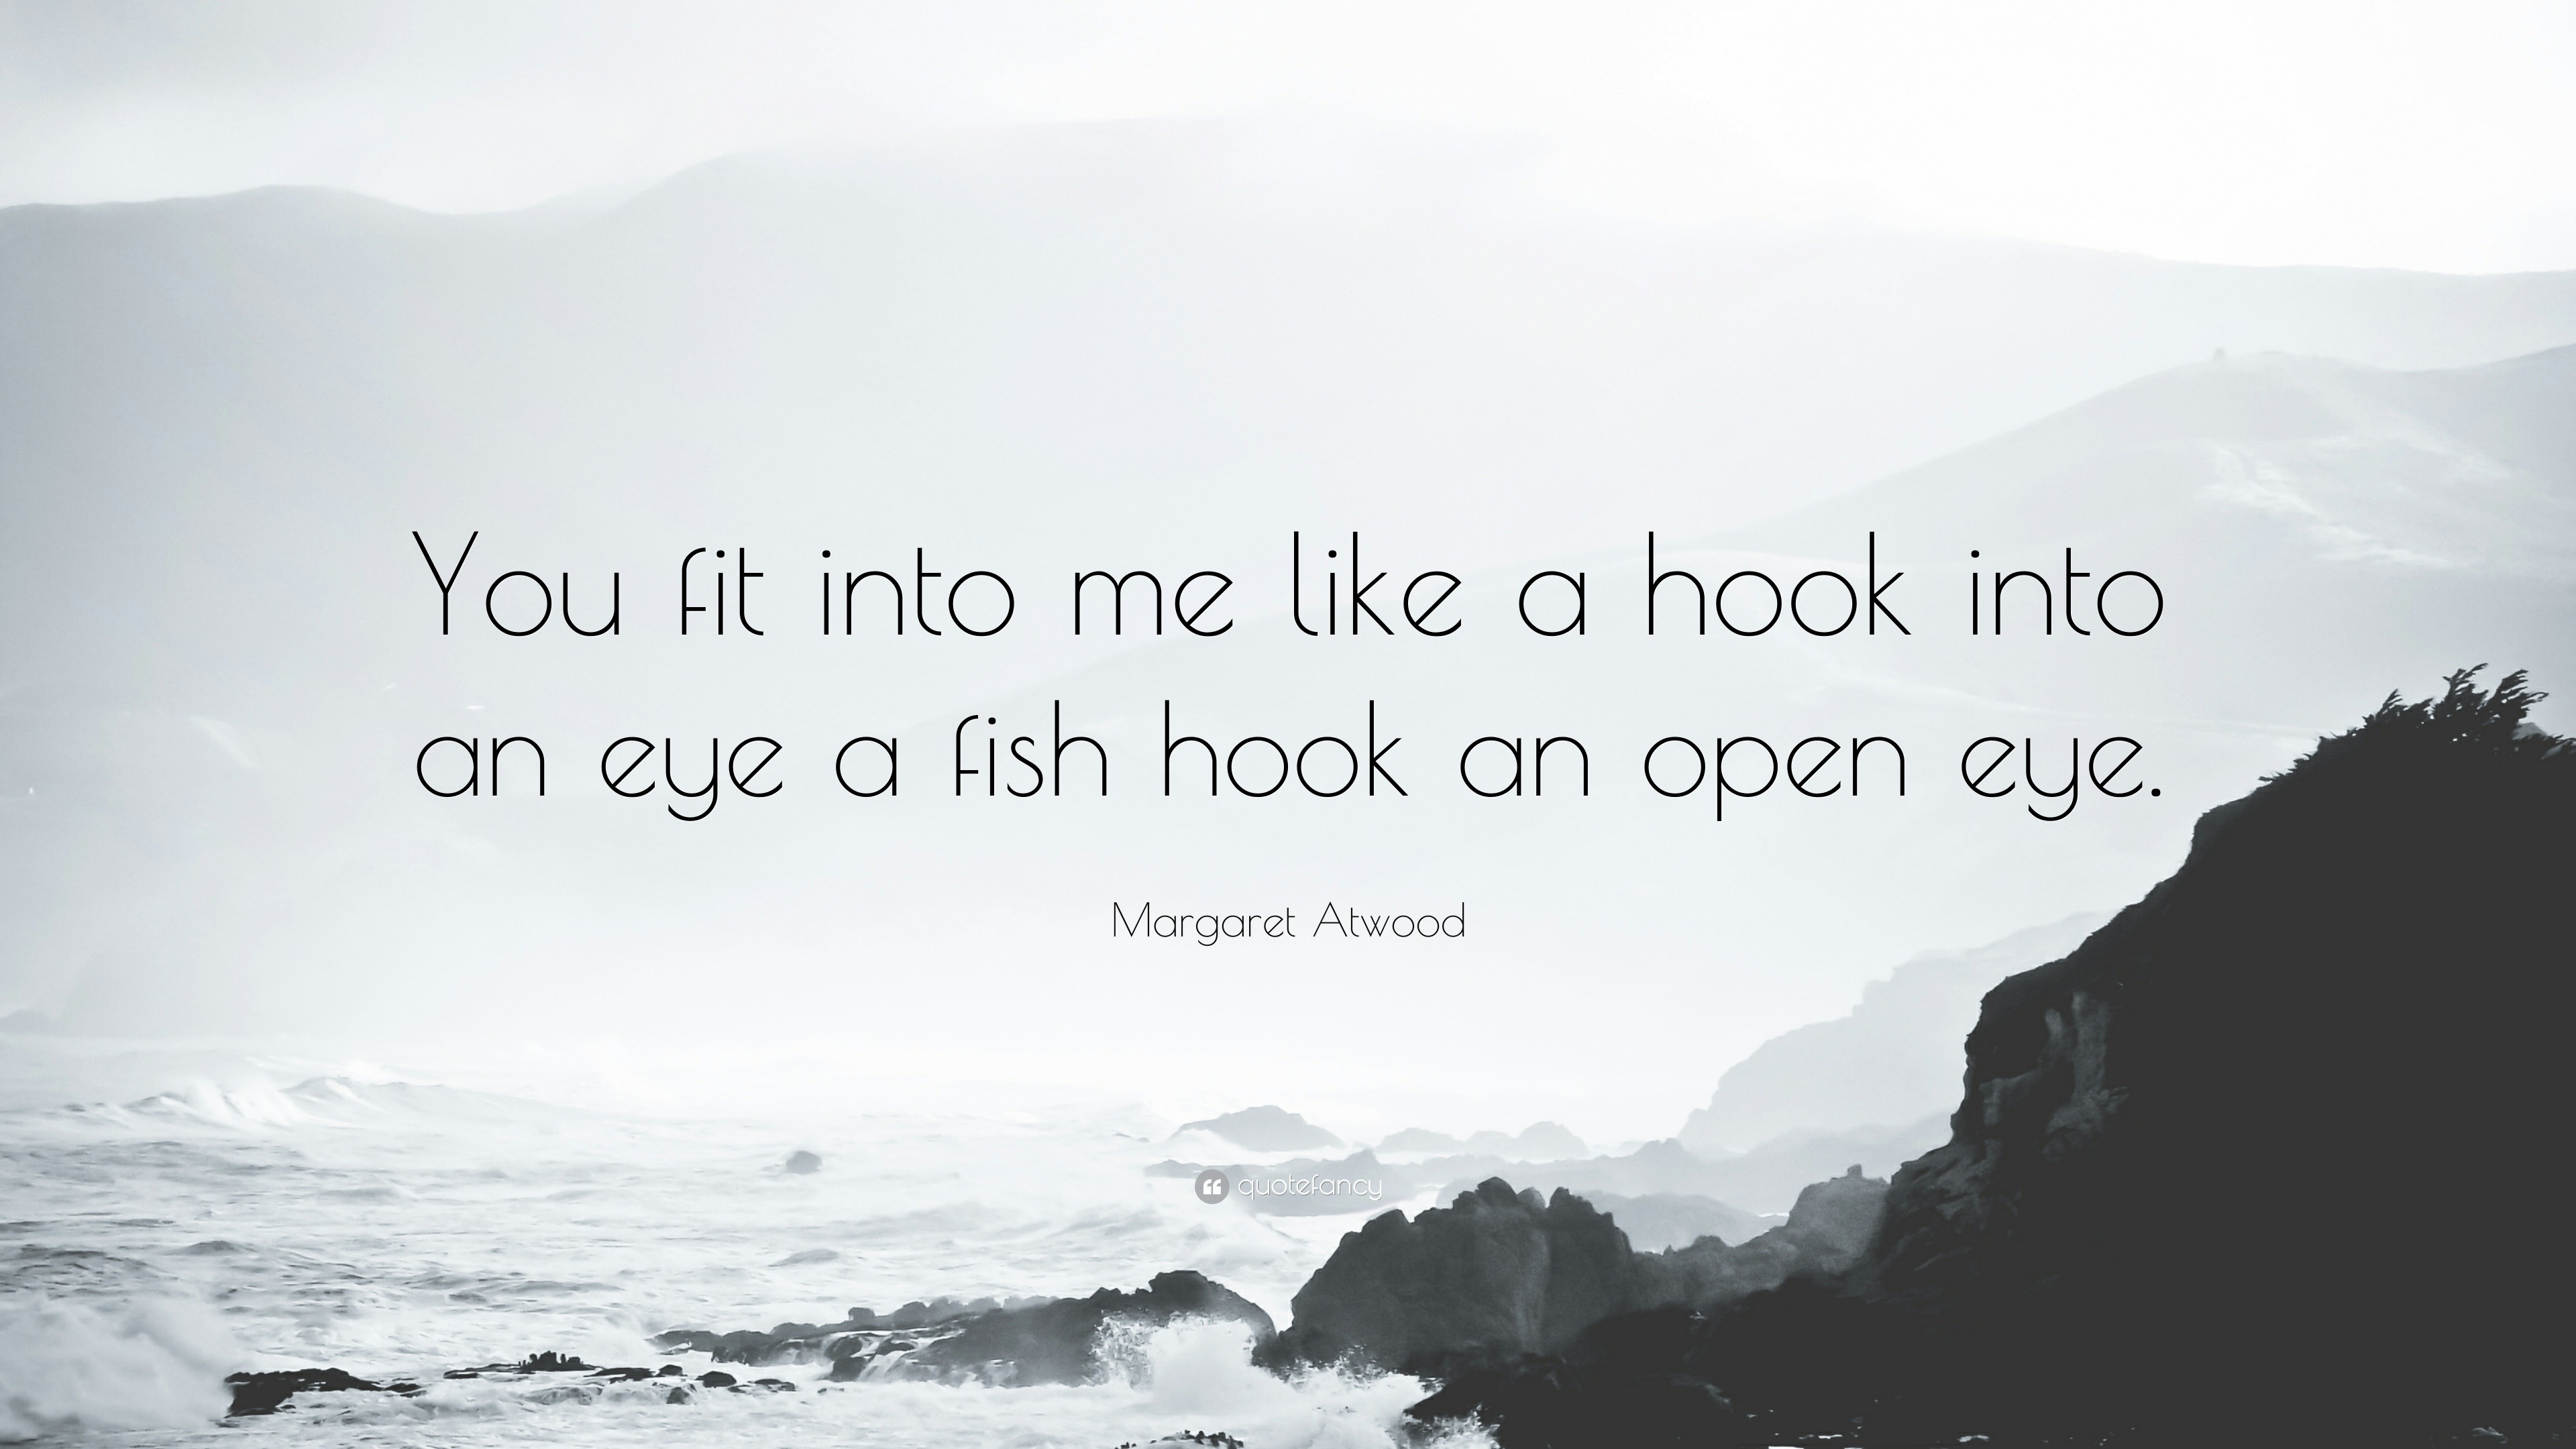 Margaret Atwood Quote: “You fit into me like a hook into an eye a fish hook